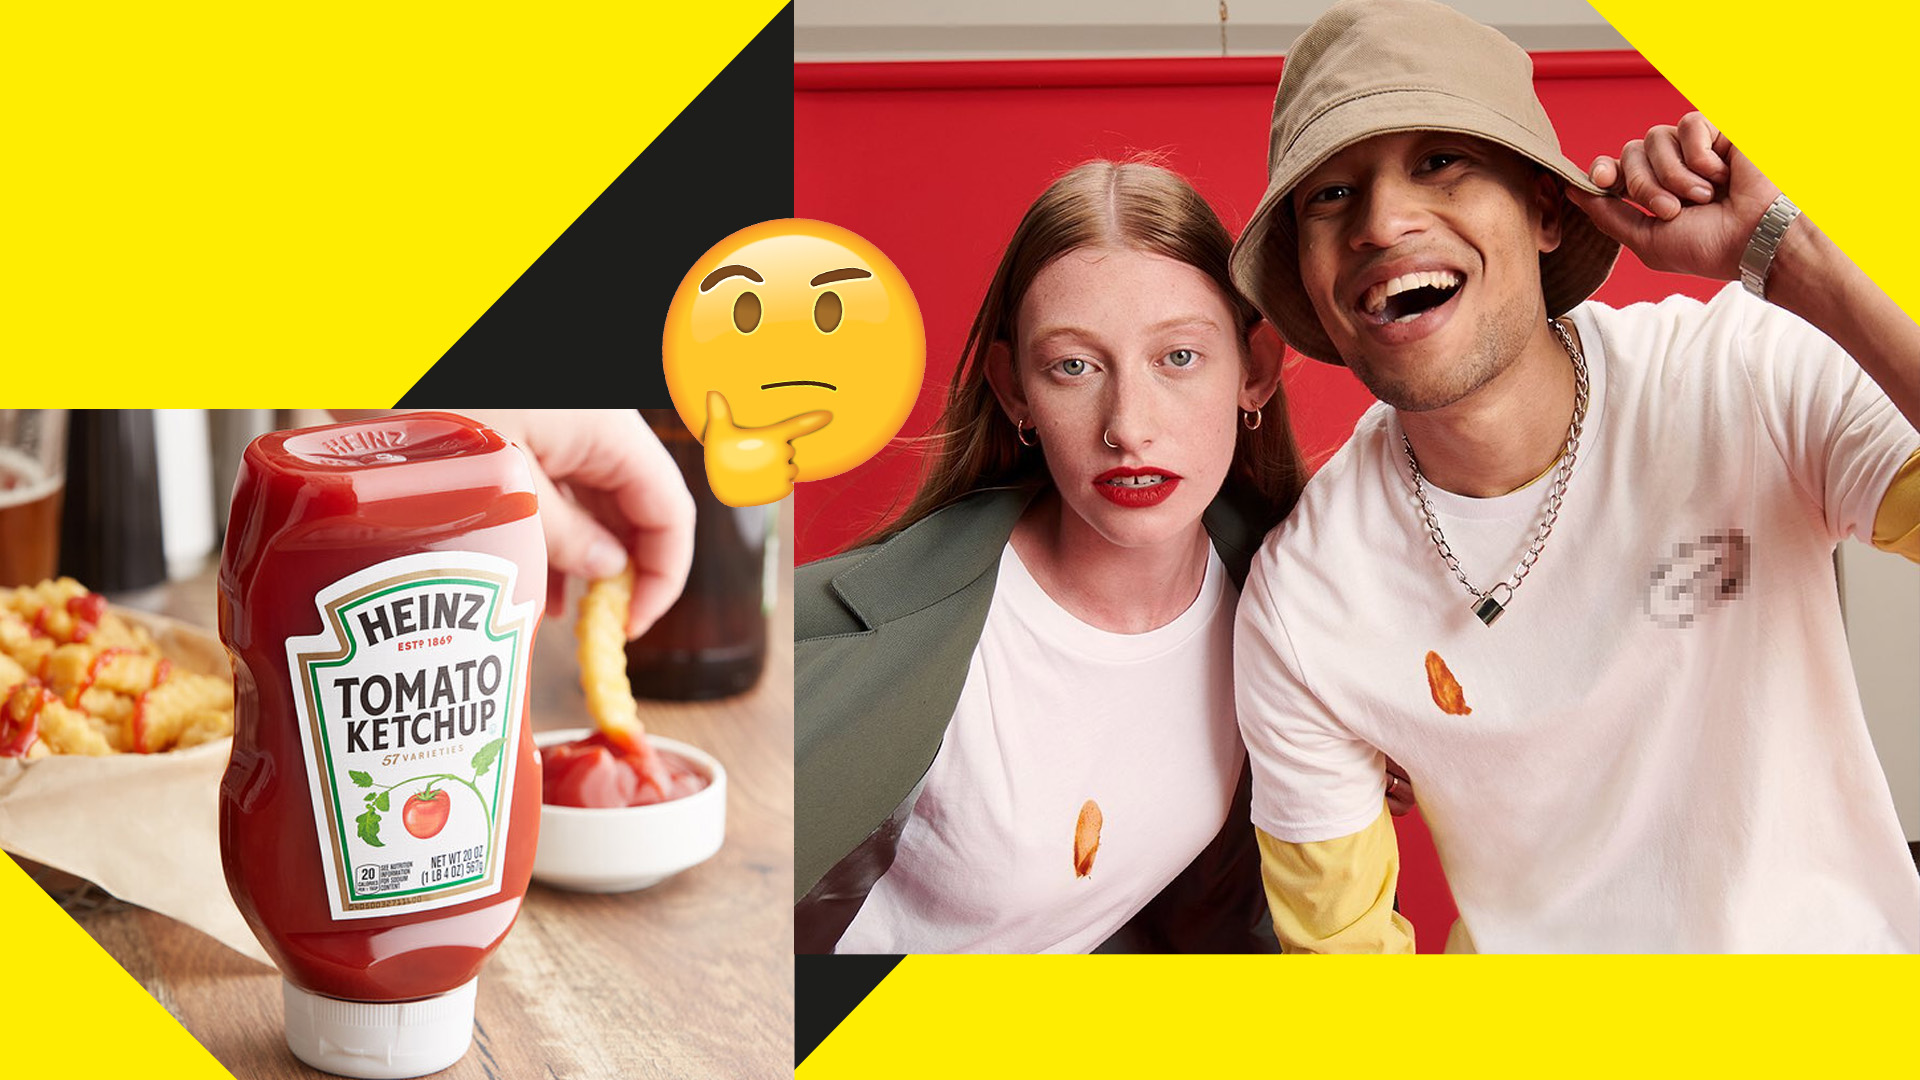 Heinz launch pre-stained clothing line with REAL ketchup stains